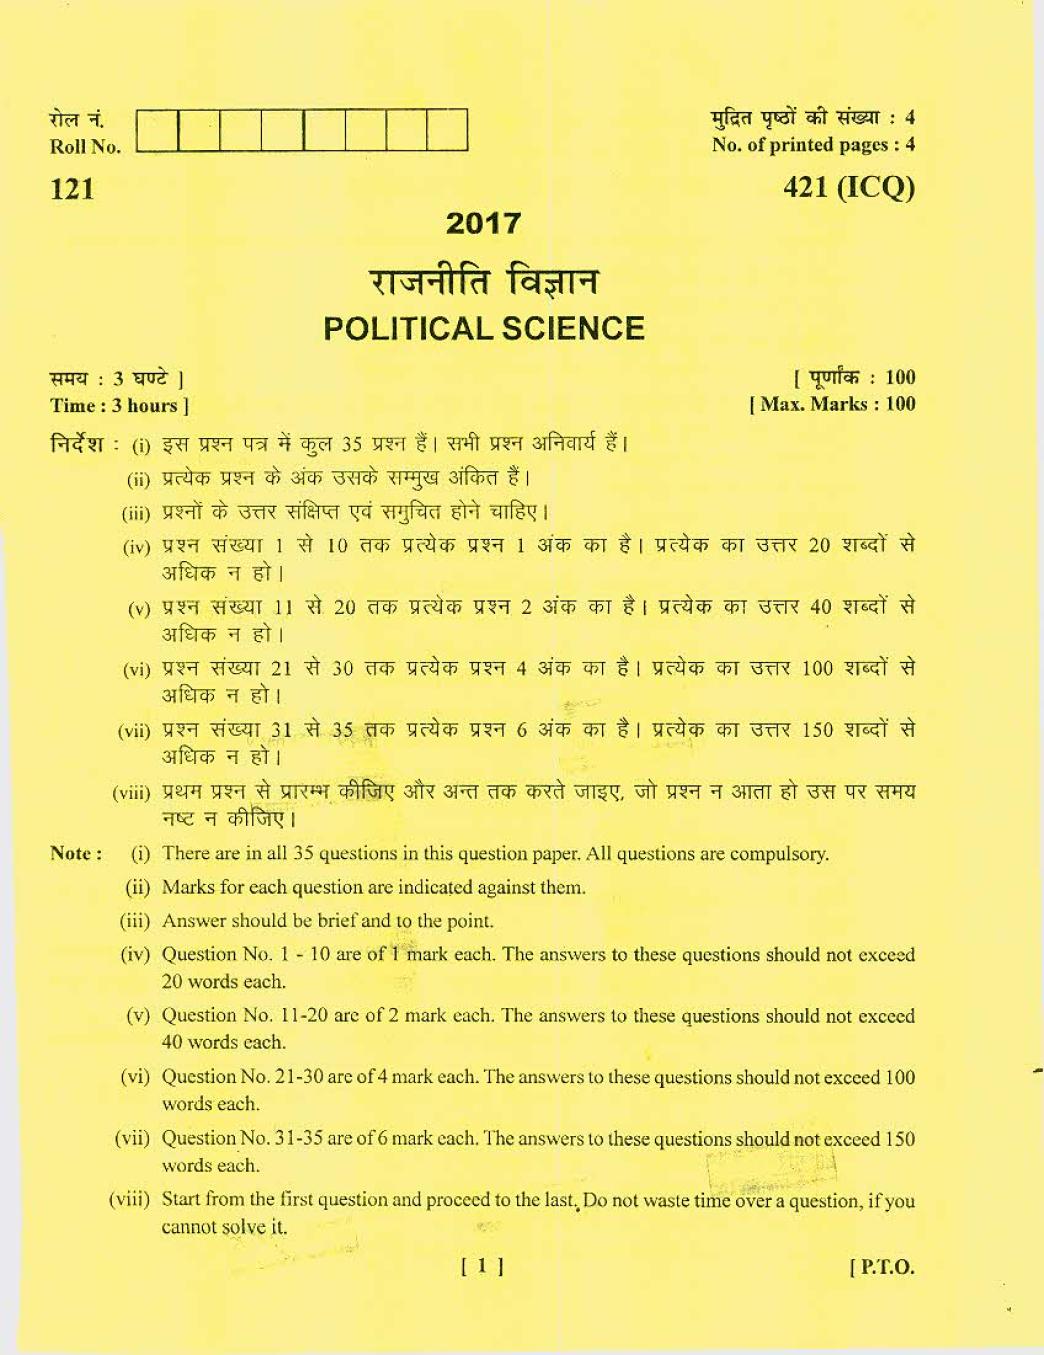 Uttarakhand Board Class 12 Question Paper 2017 for Political Science - Page 1